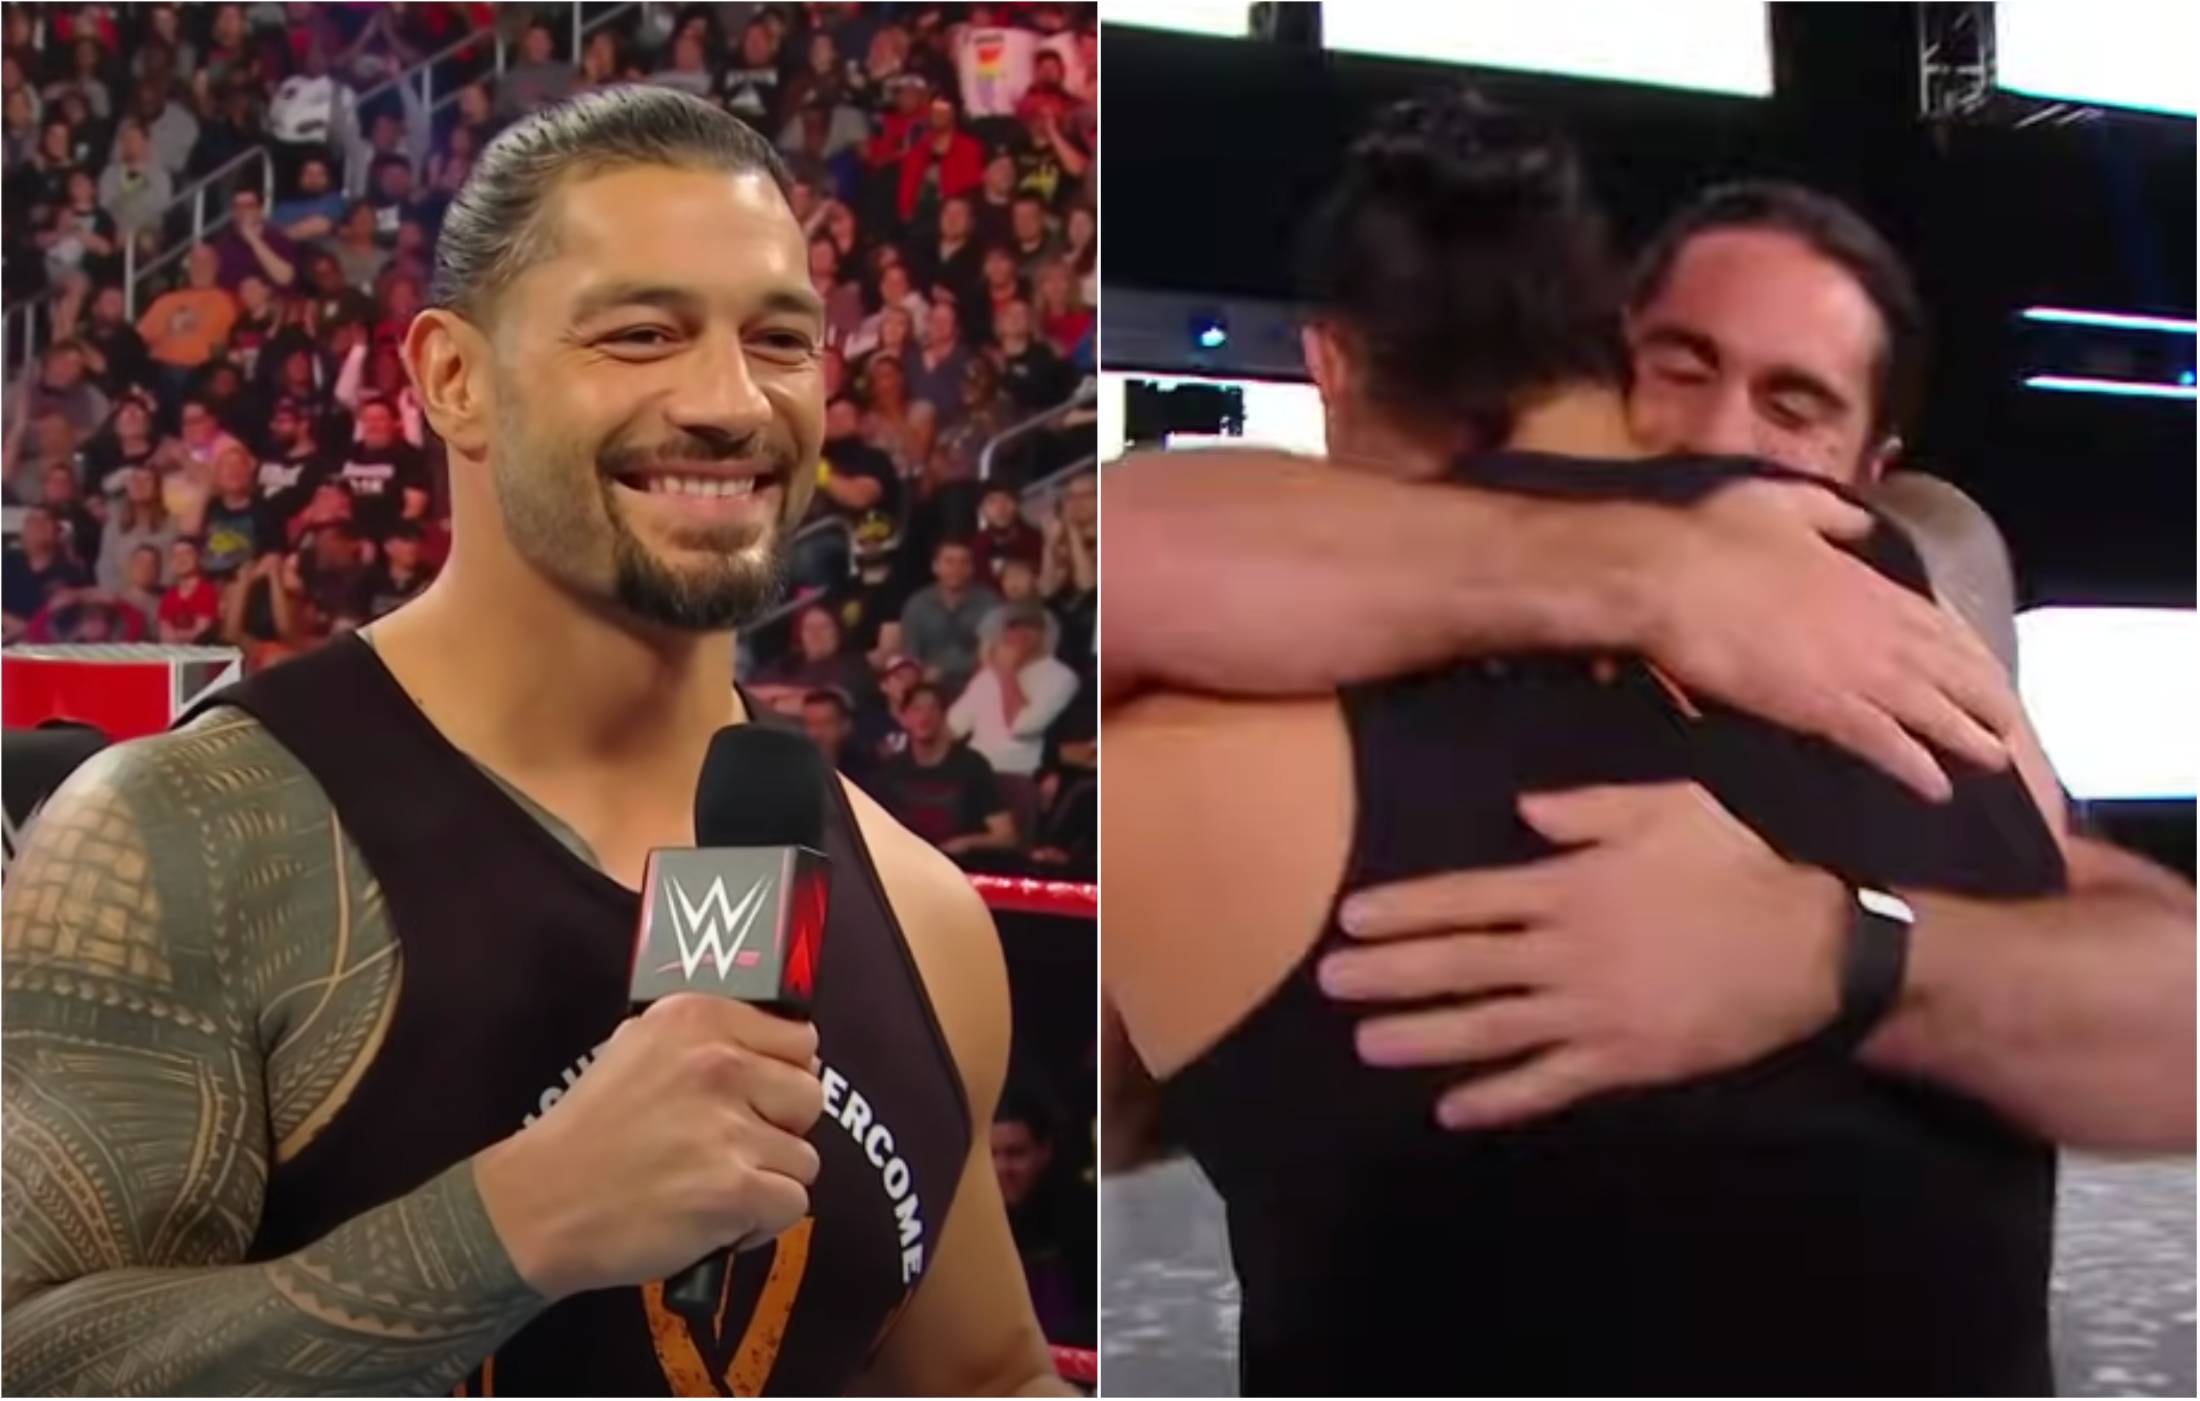 Roman Reigns beat cancer and made the announcement in 2019